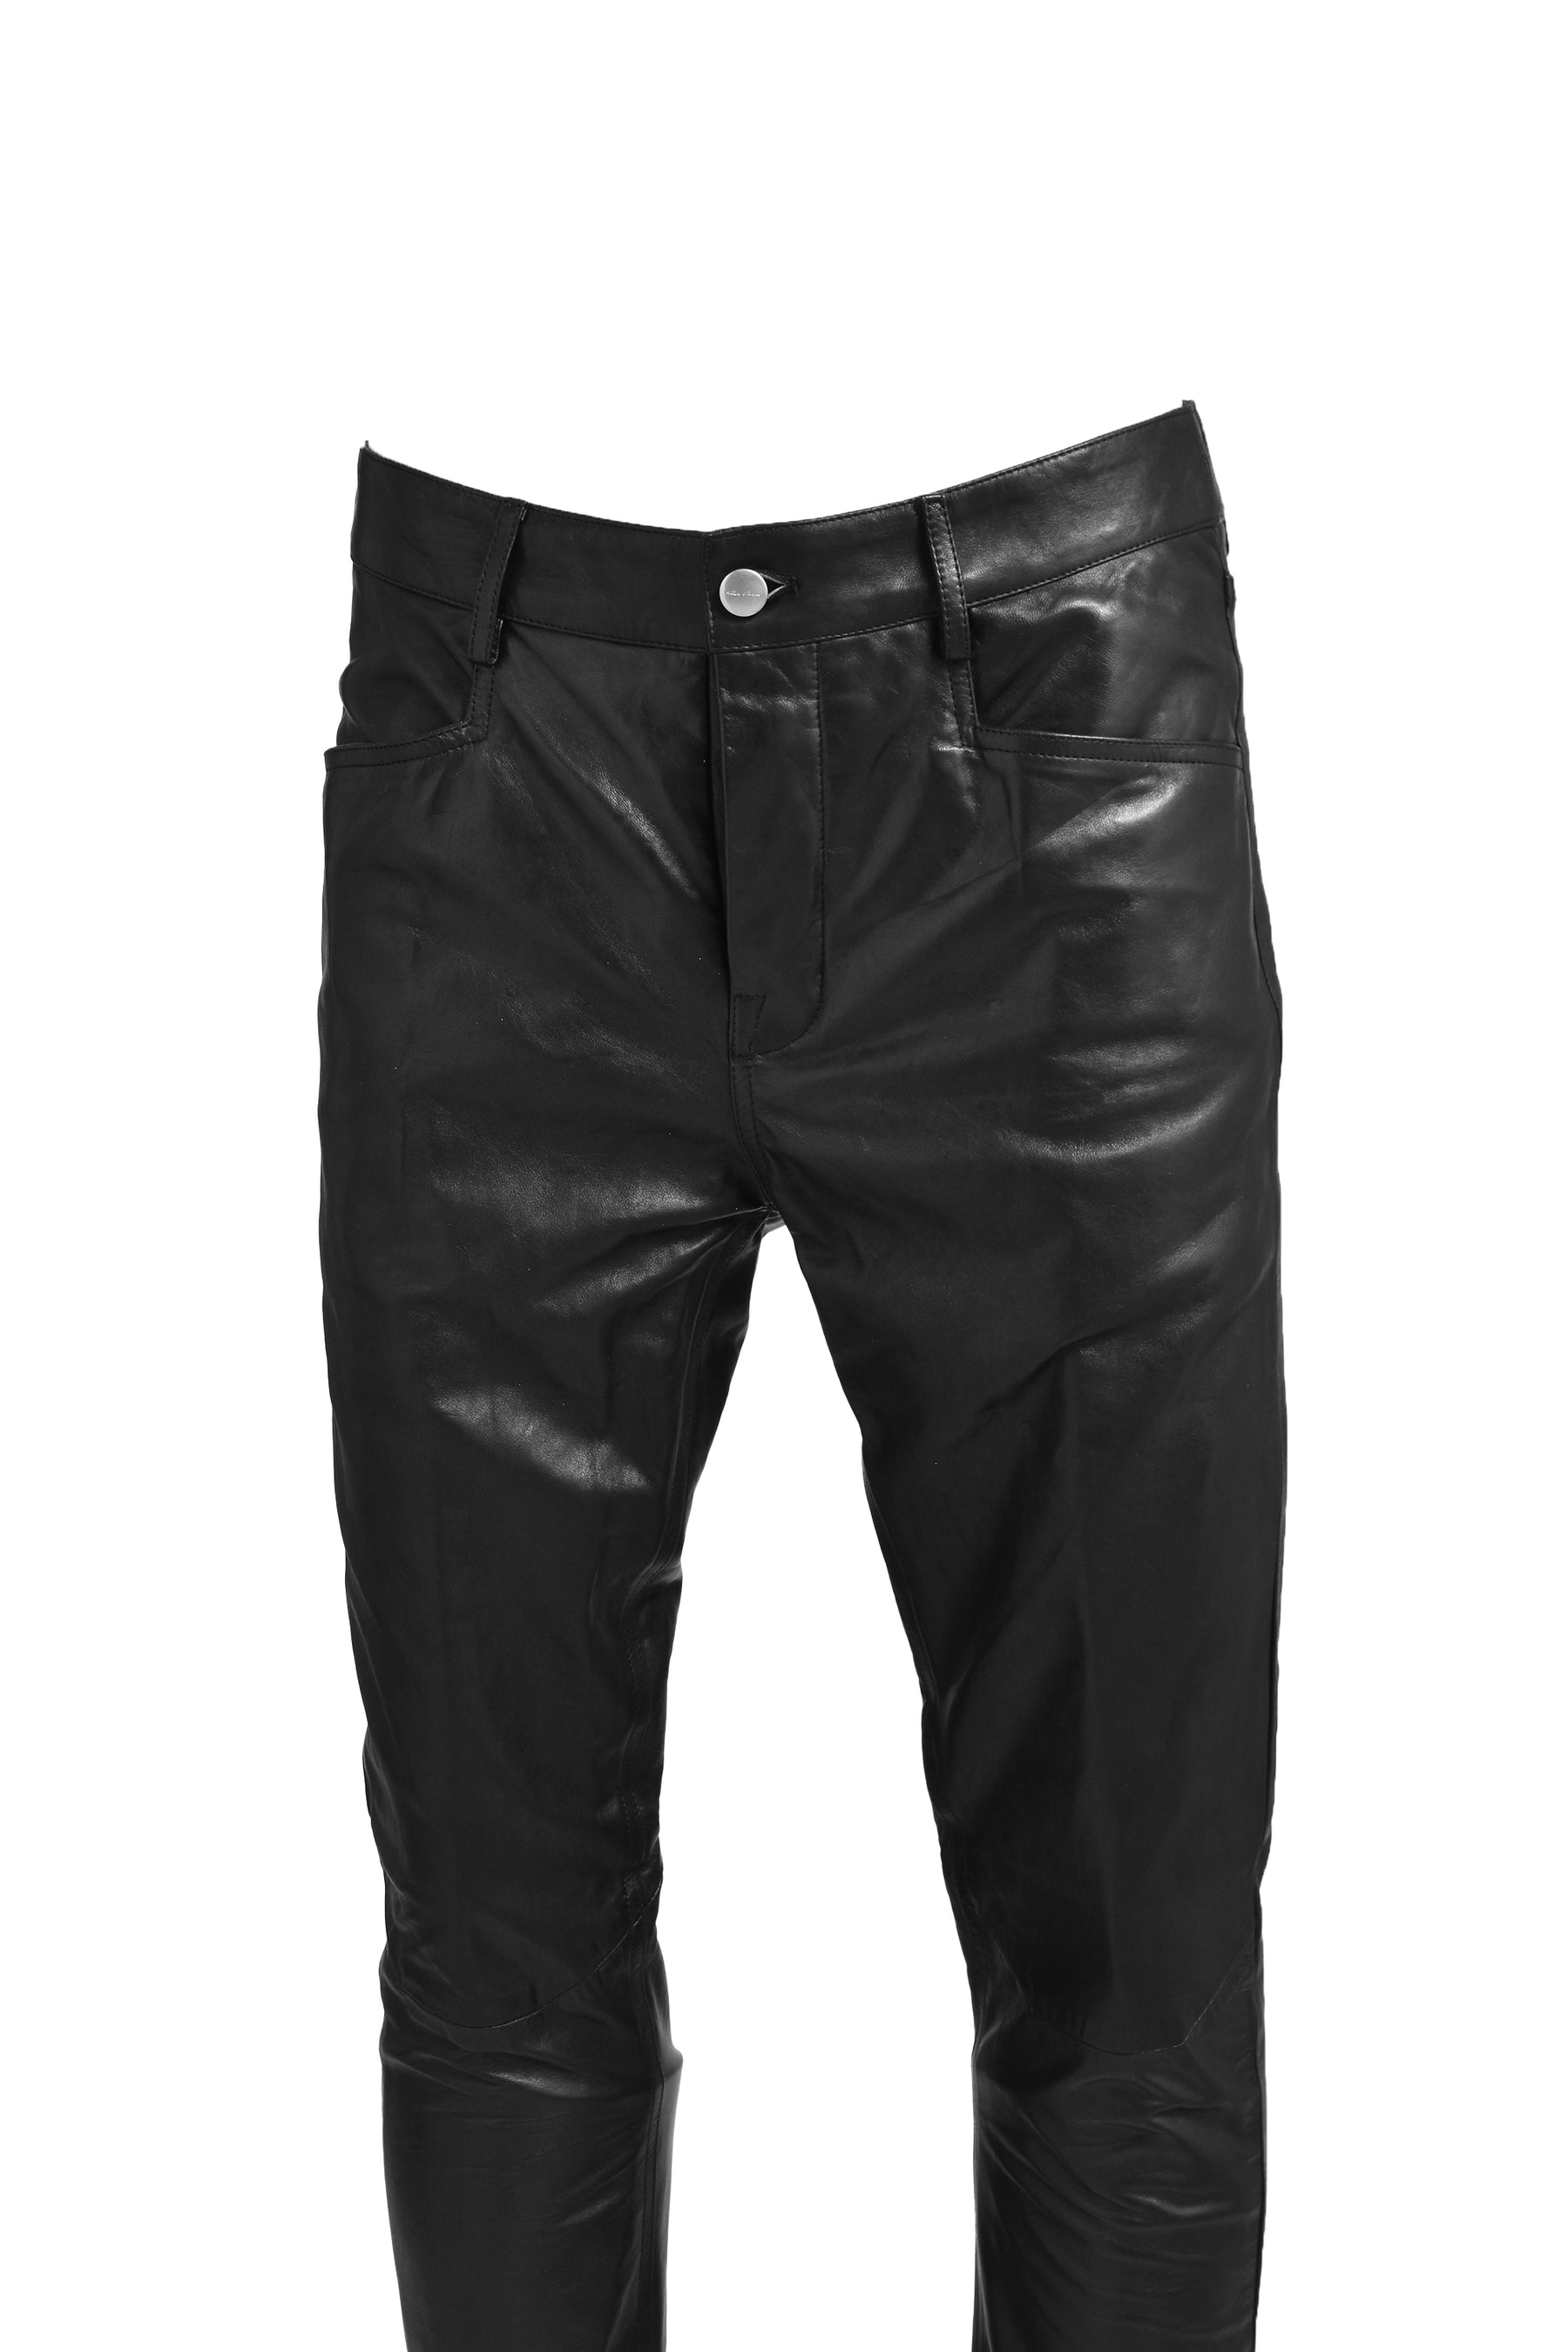 TYRONE JEANS / BLK